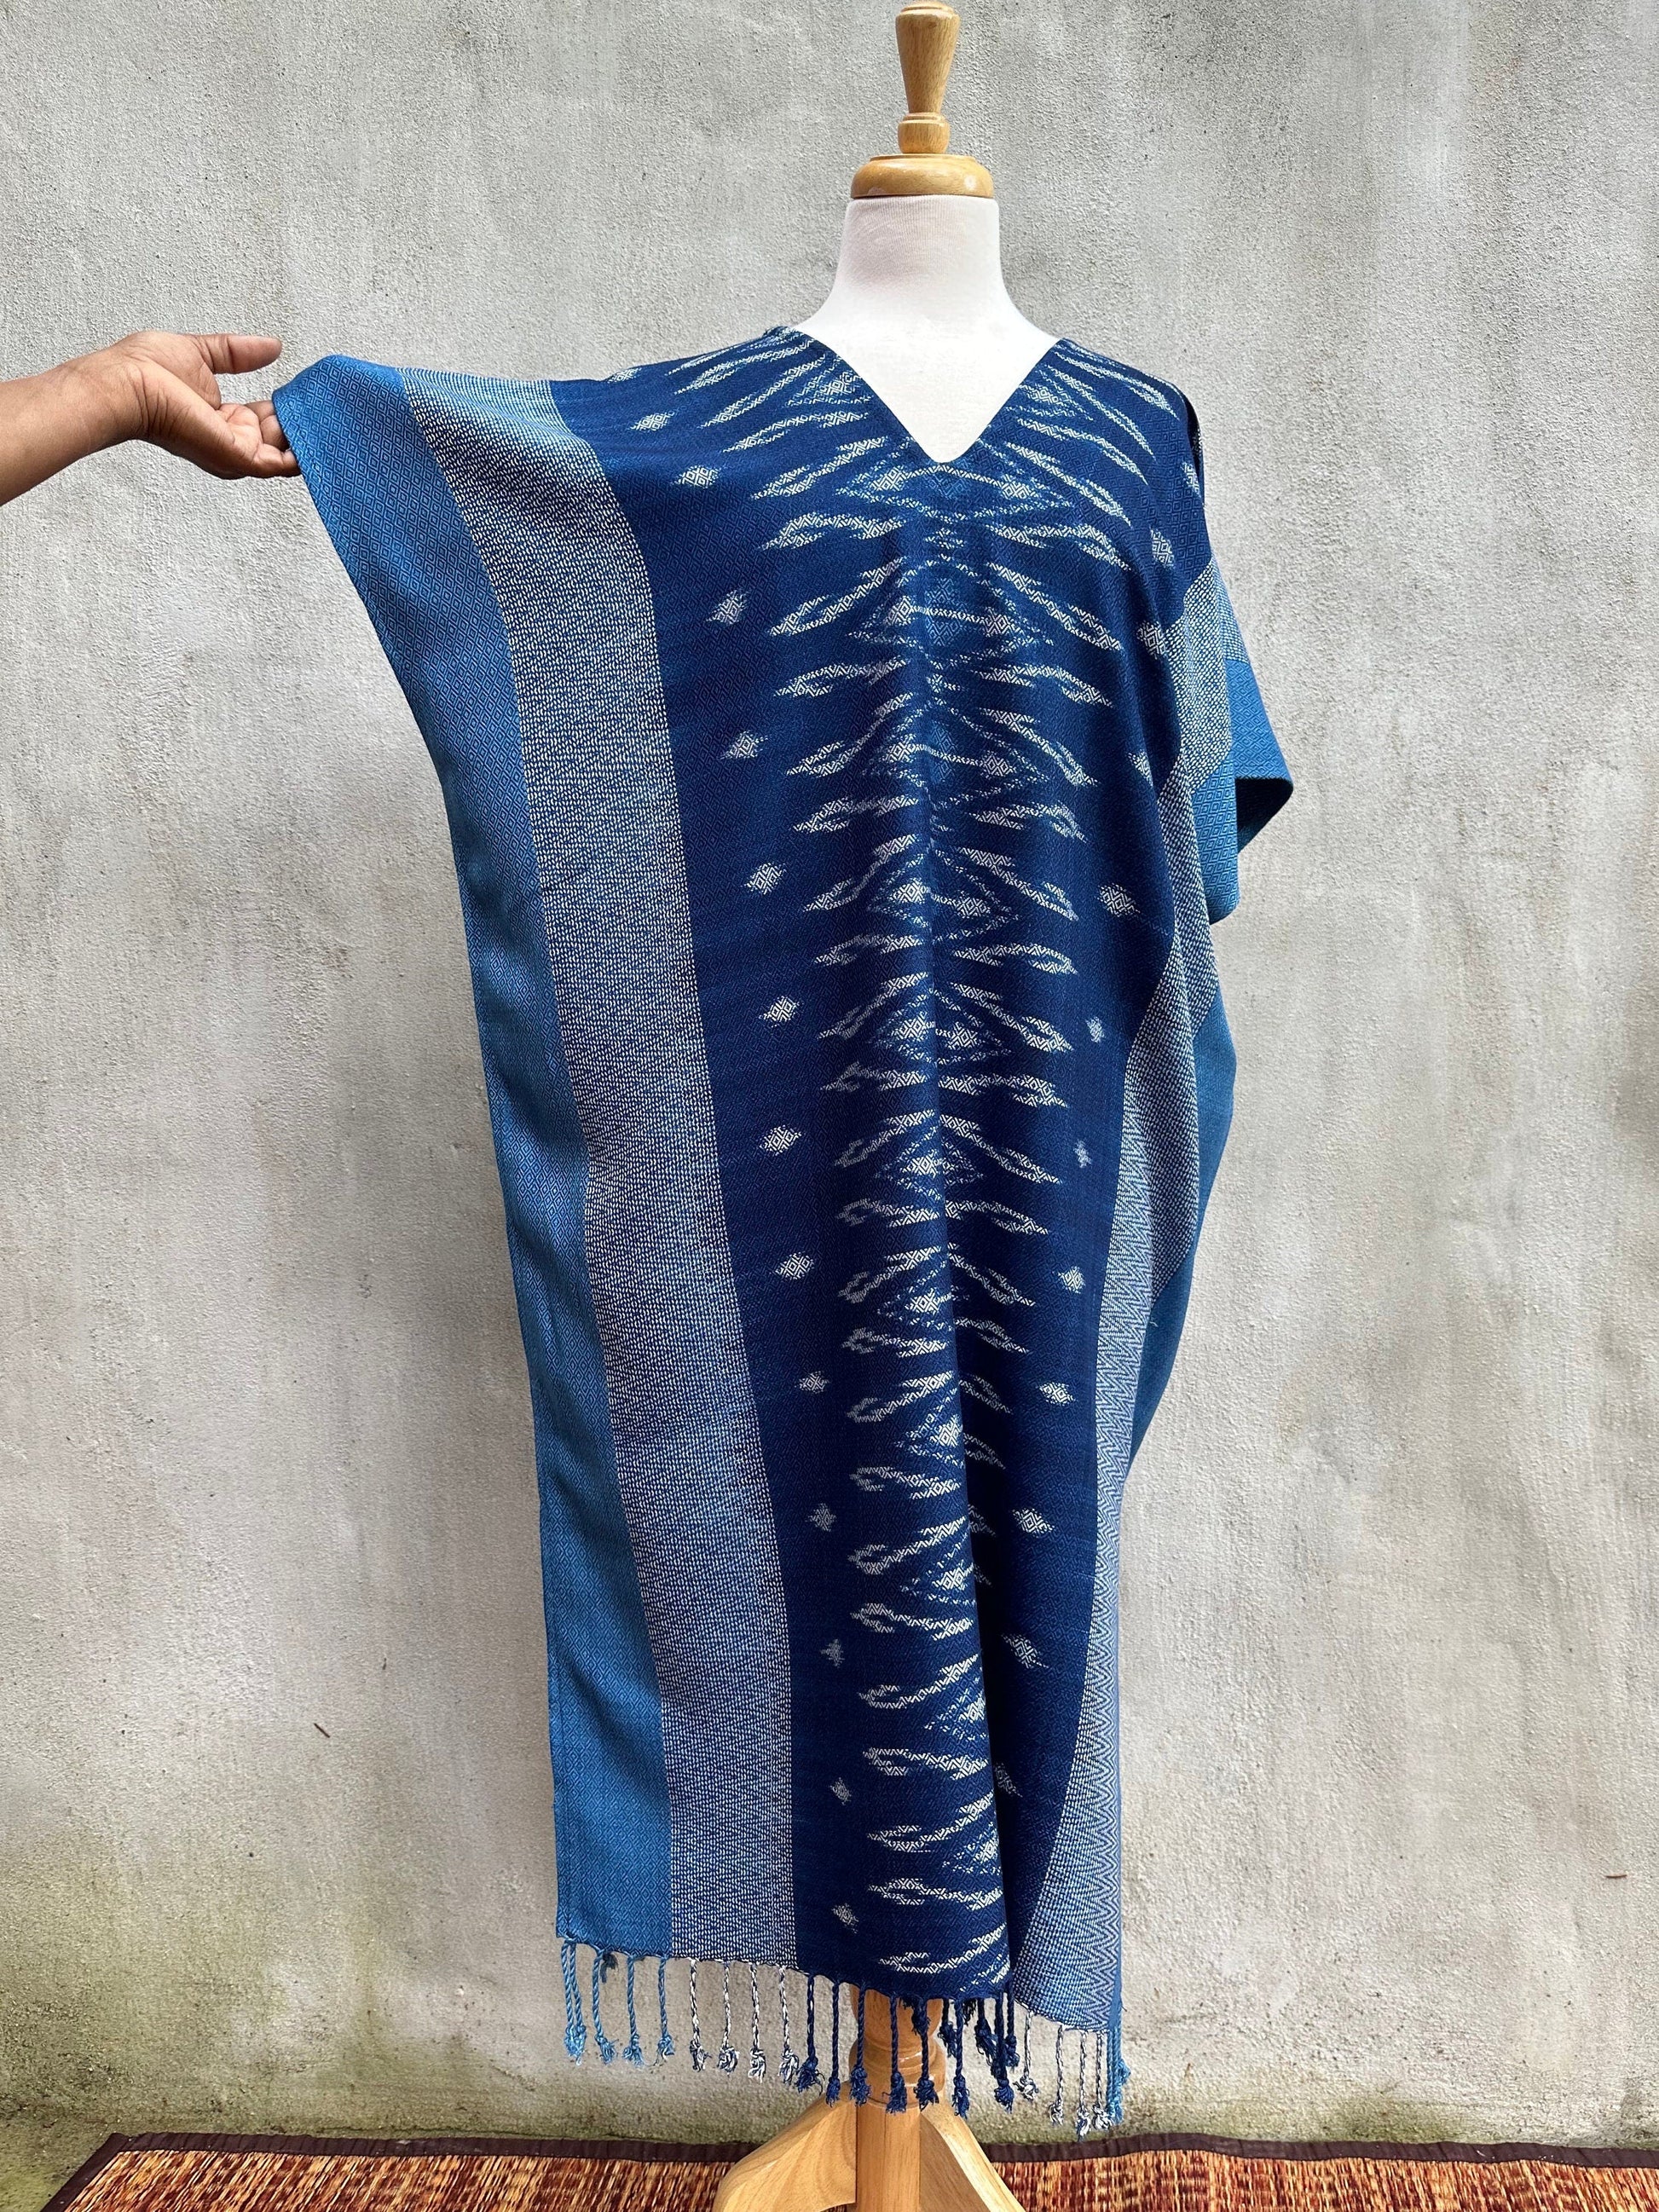 MALA handworks  Ikat Hand Woven Pattern Kaftan in Indigo Blue with Light Gray and White